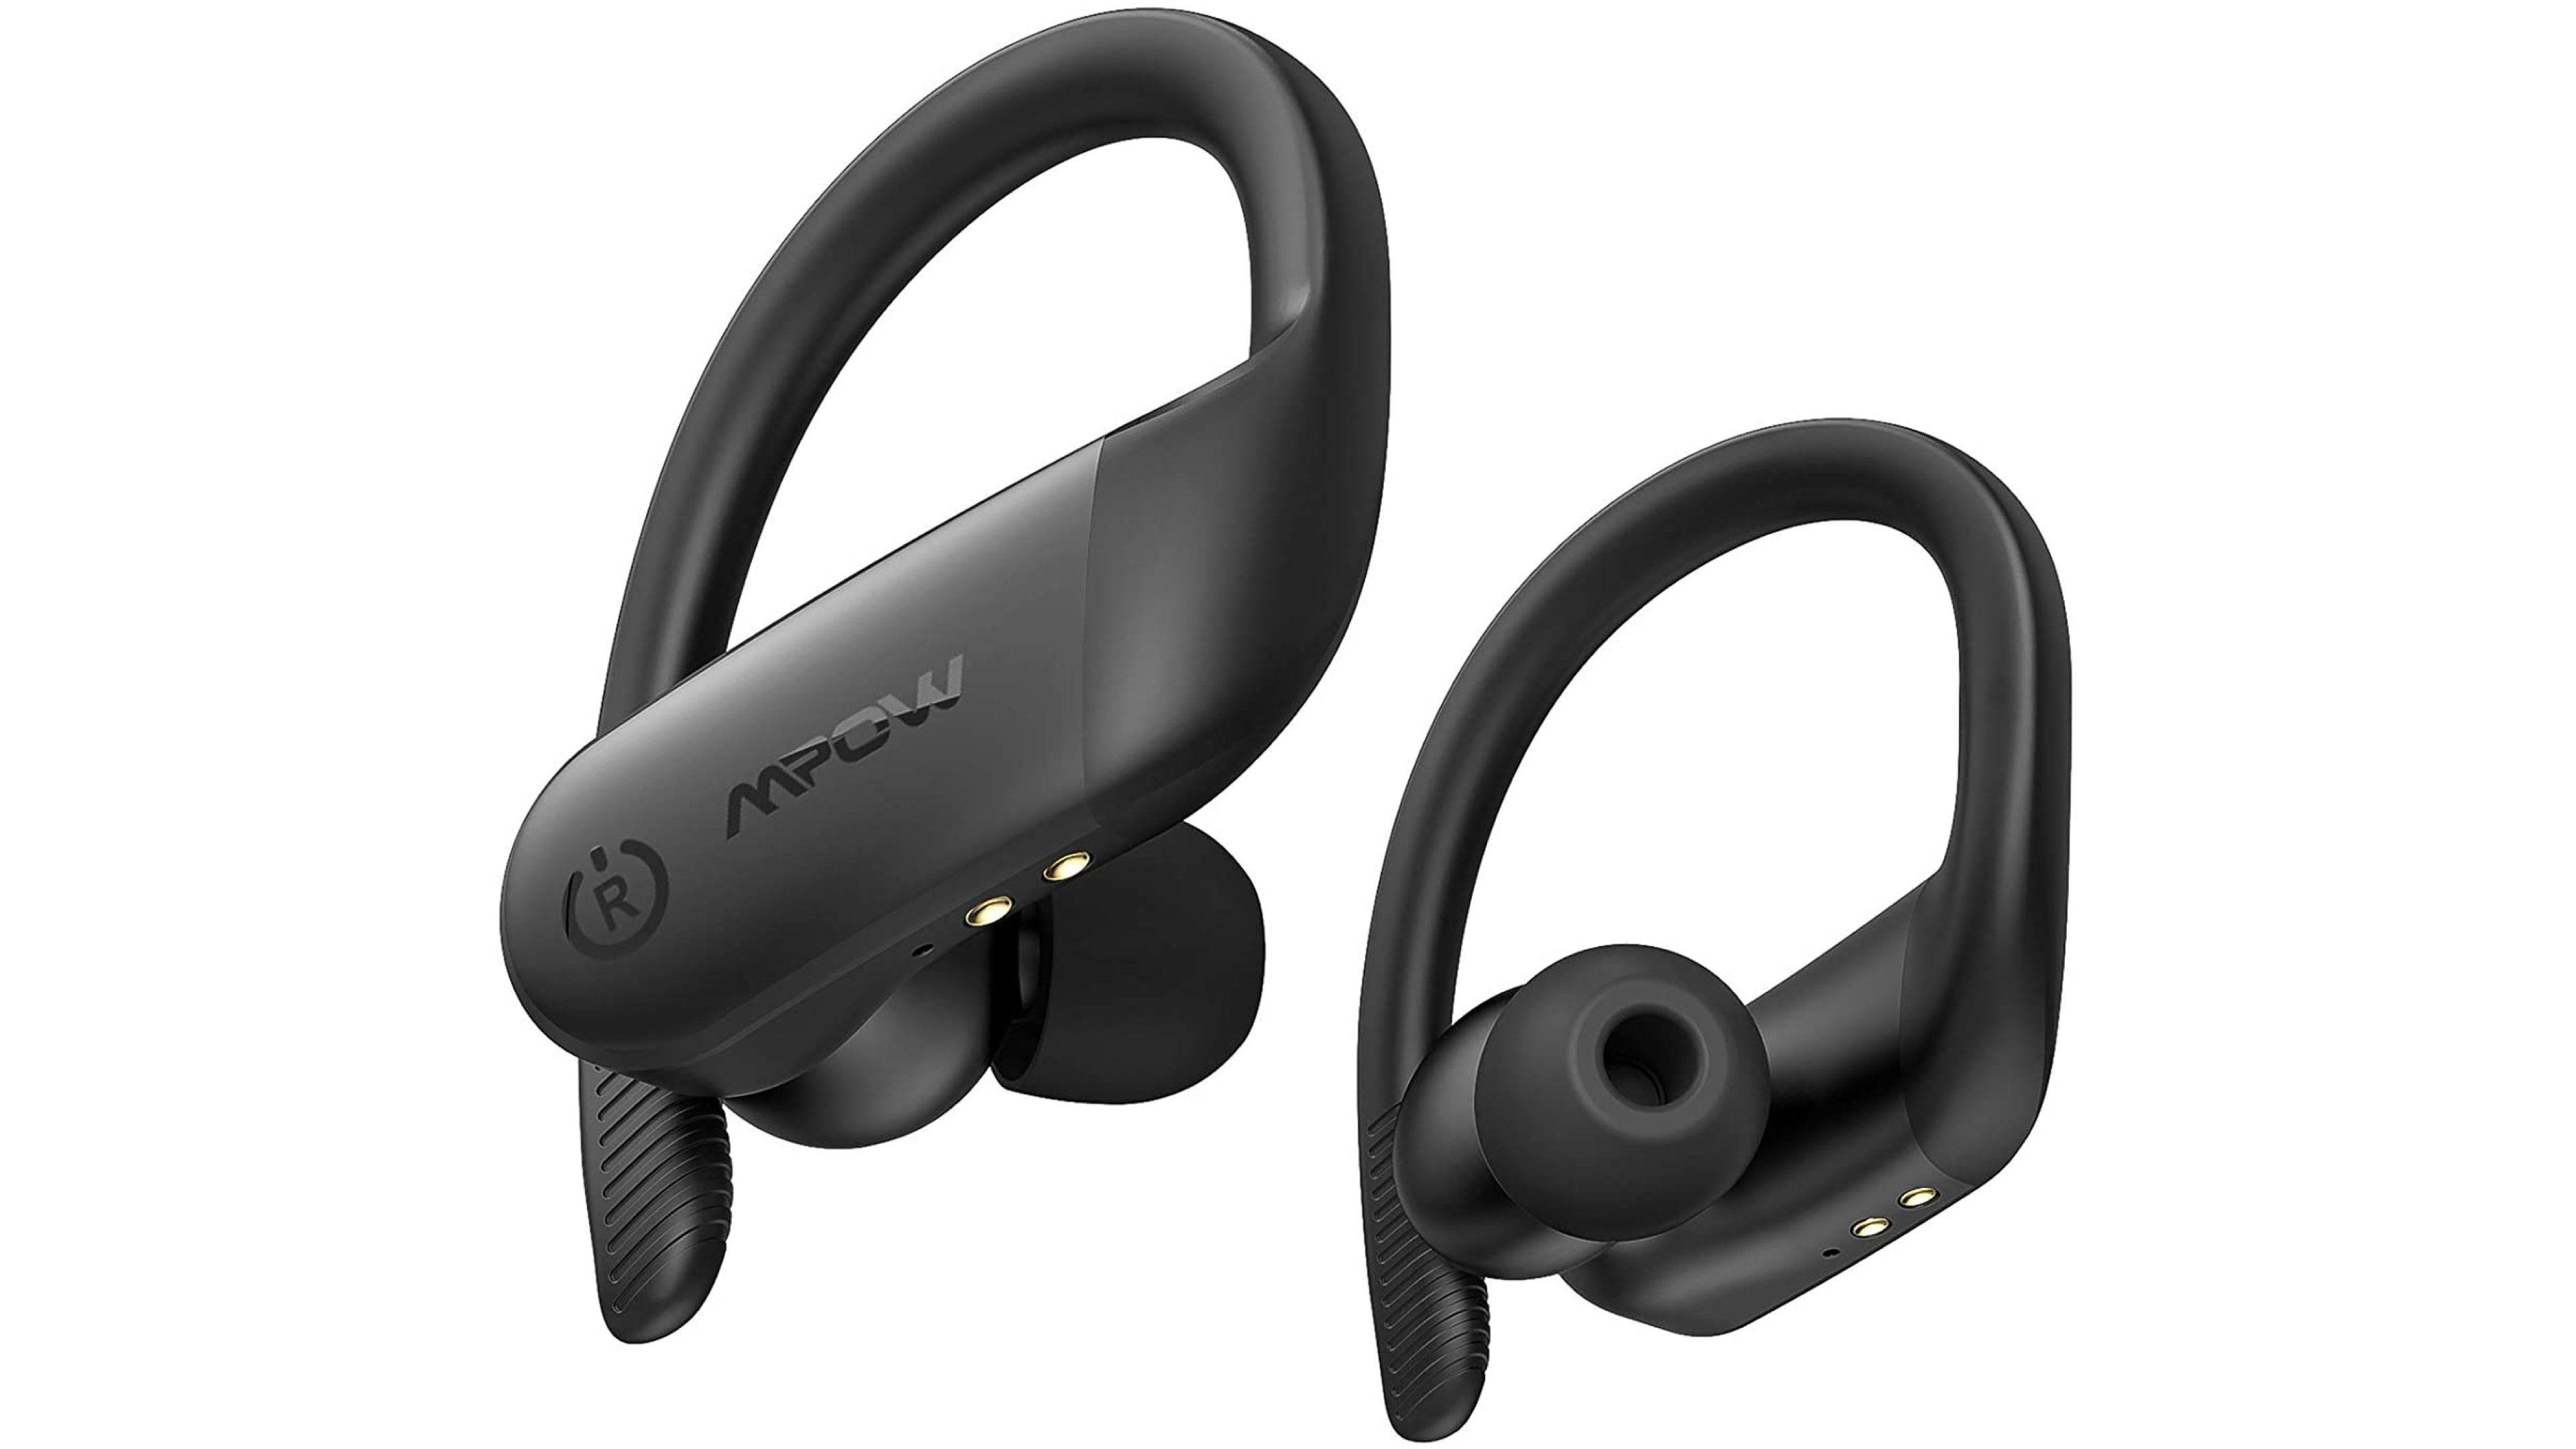 wireless earbuds for workouts and listening to music or taking phone calls 